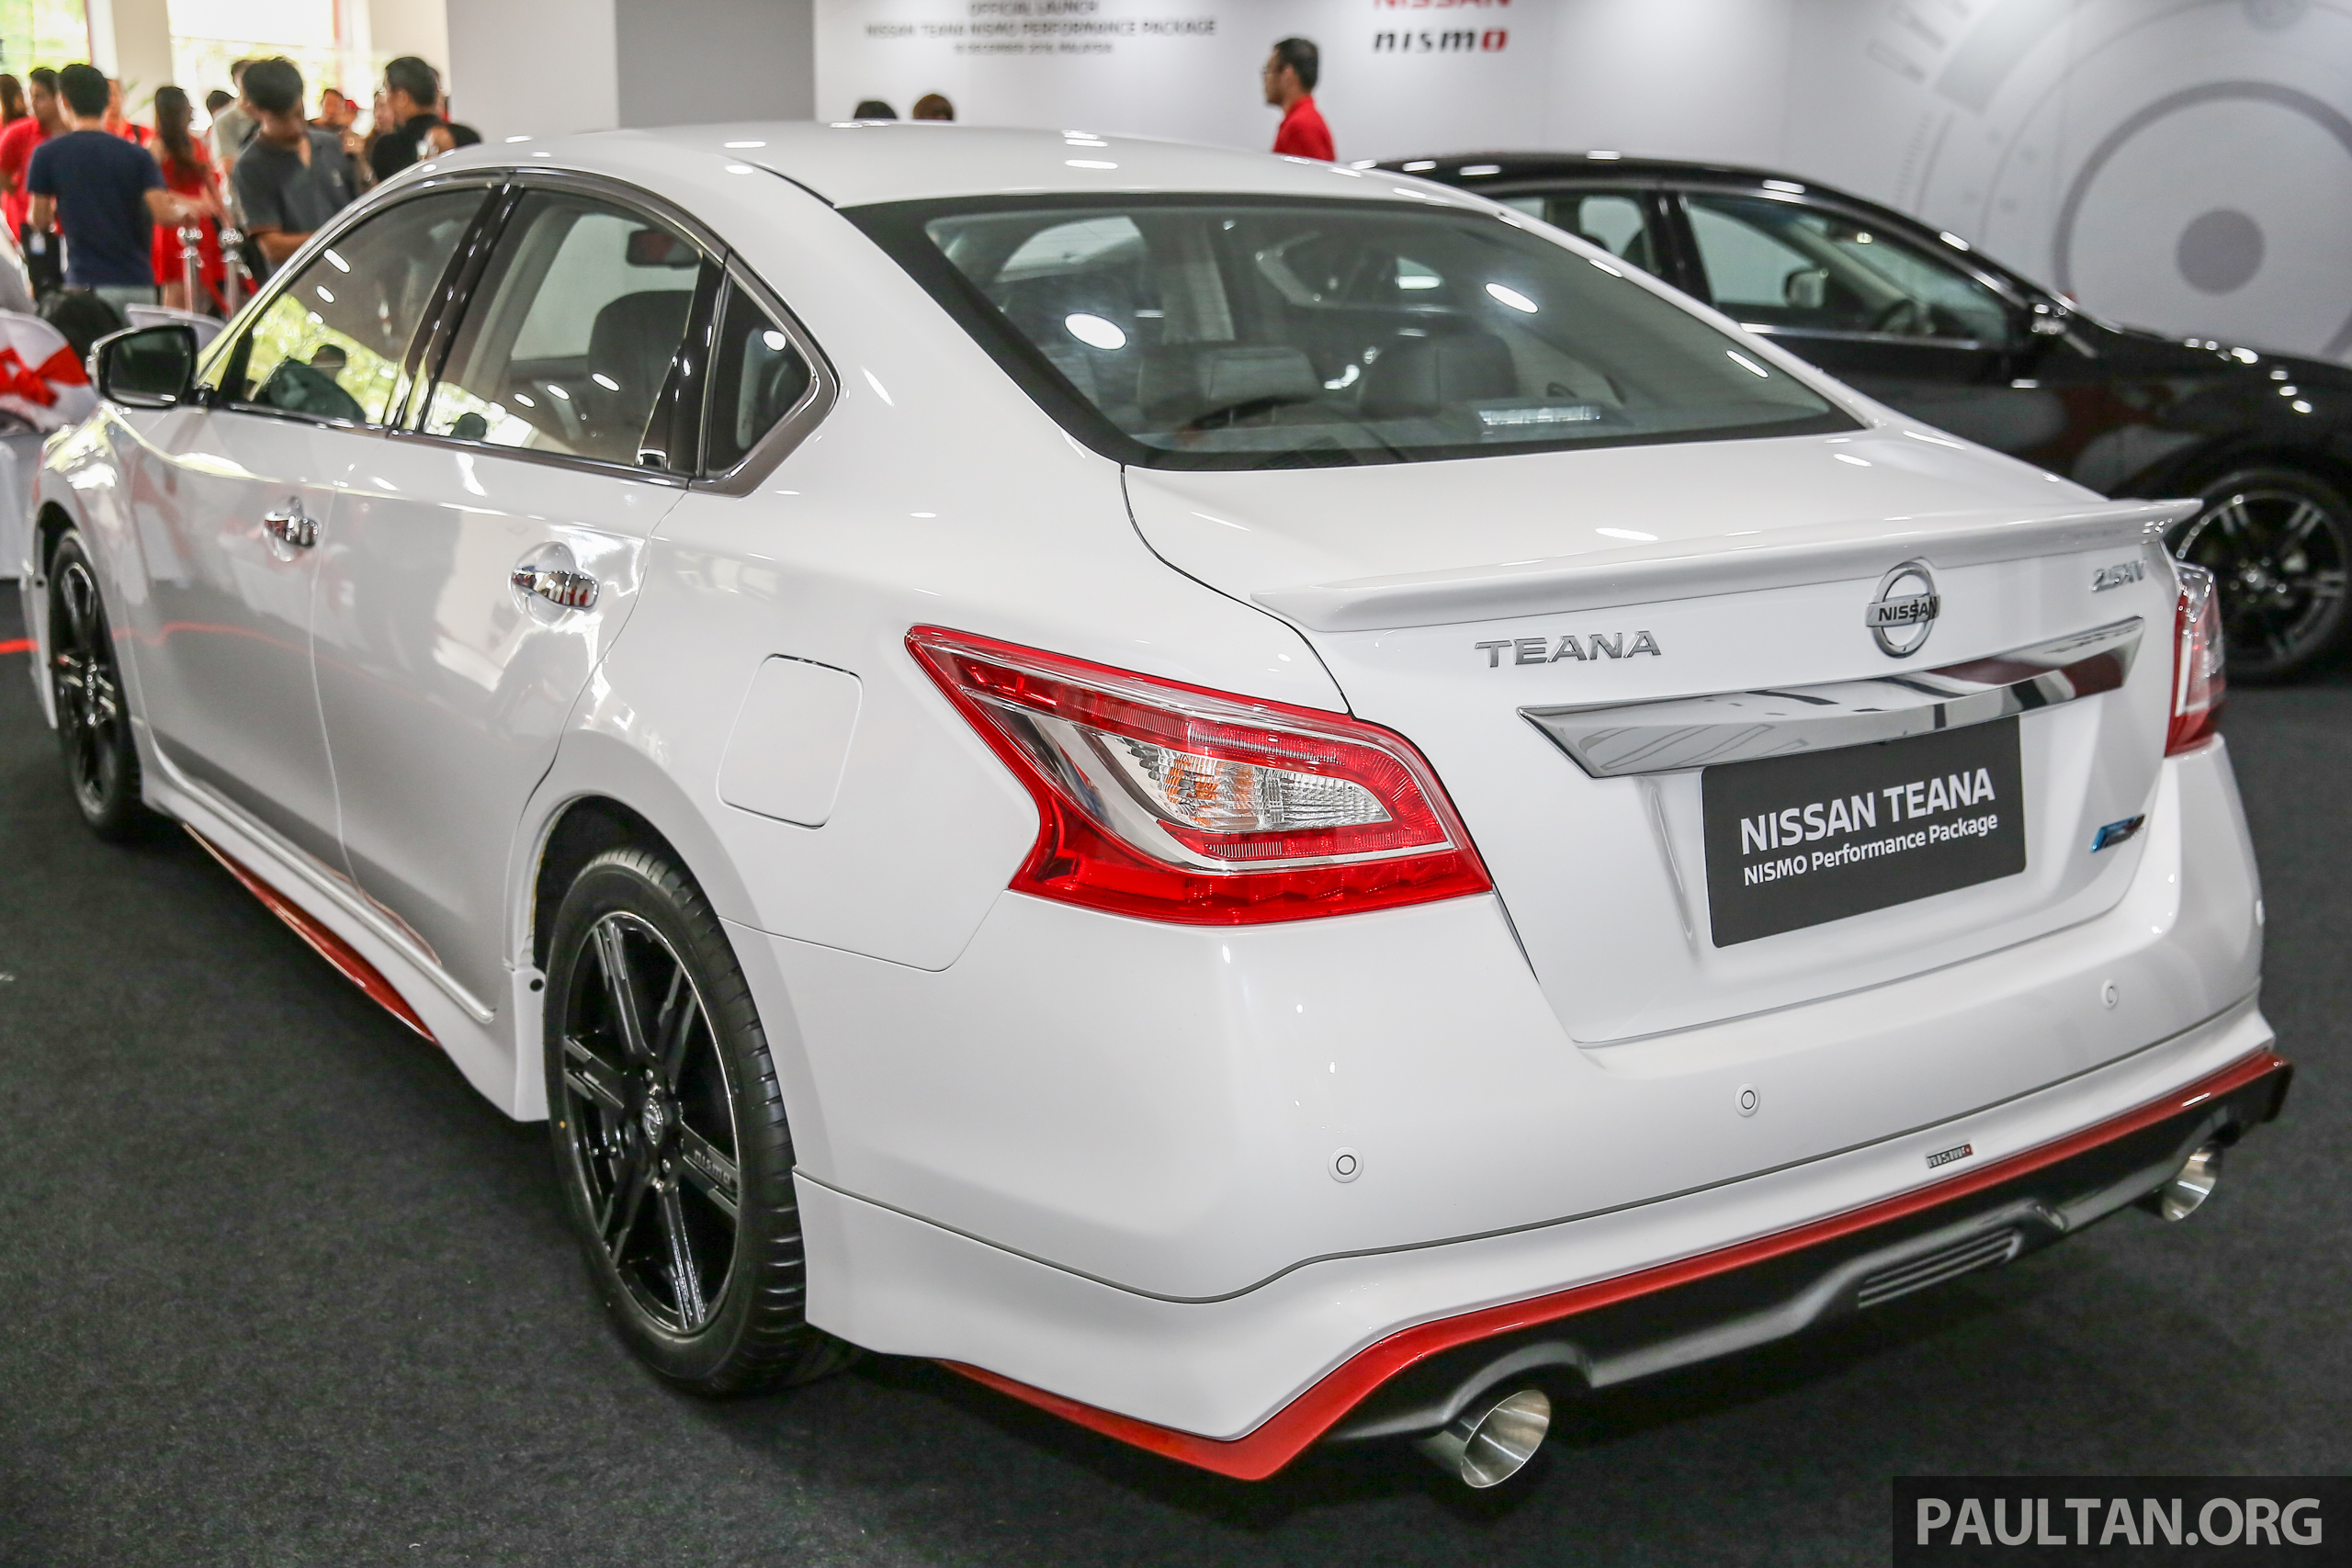 Nissan Teana Nismo Performance Package, from RM6k Image 592964